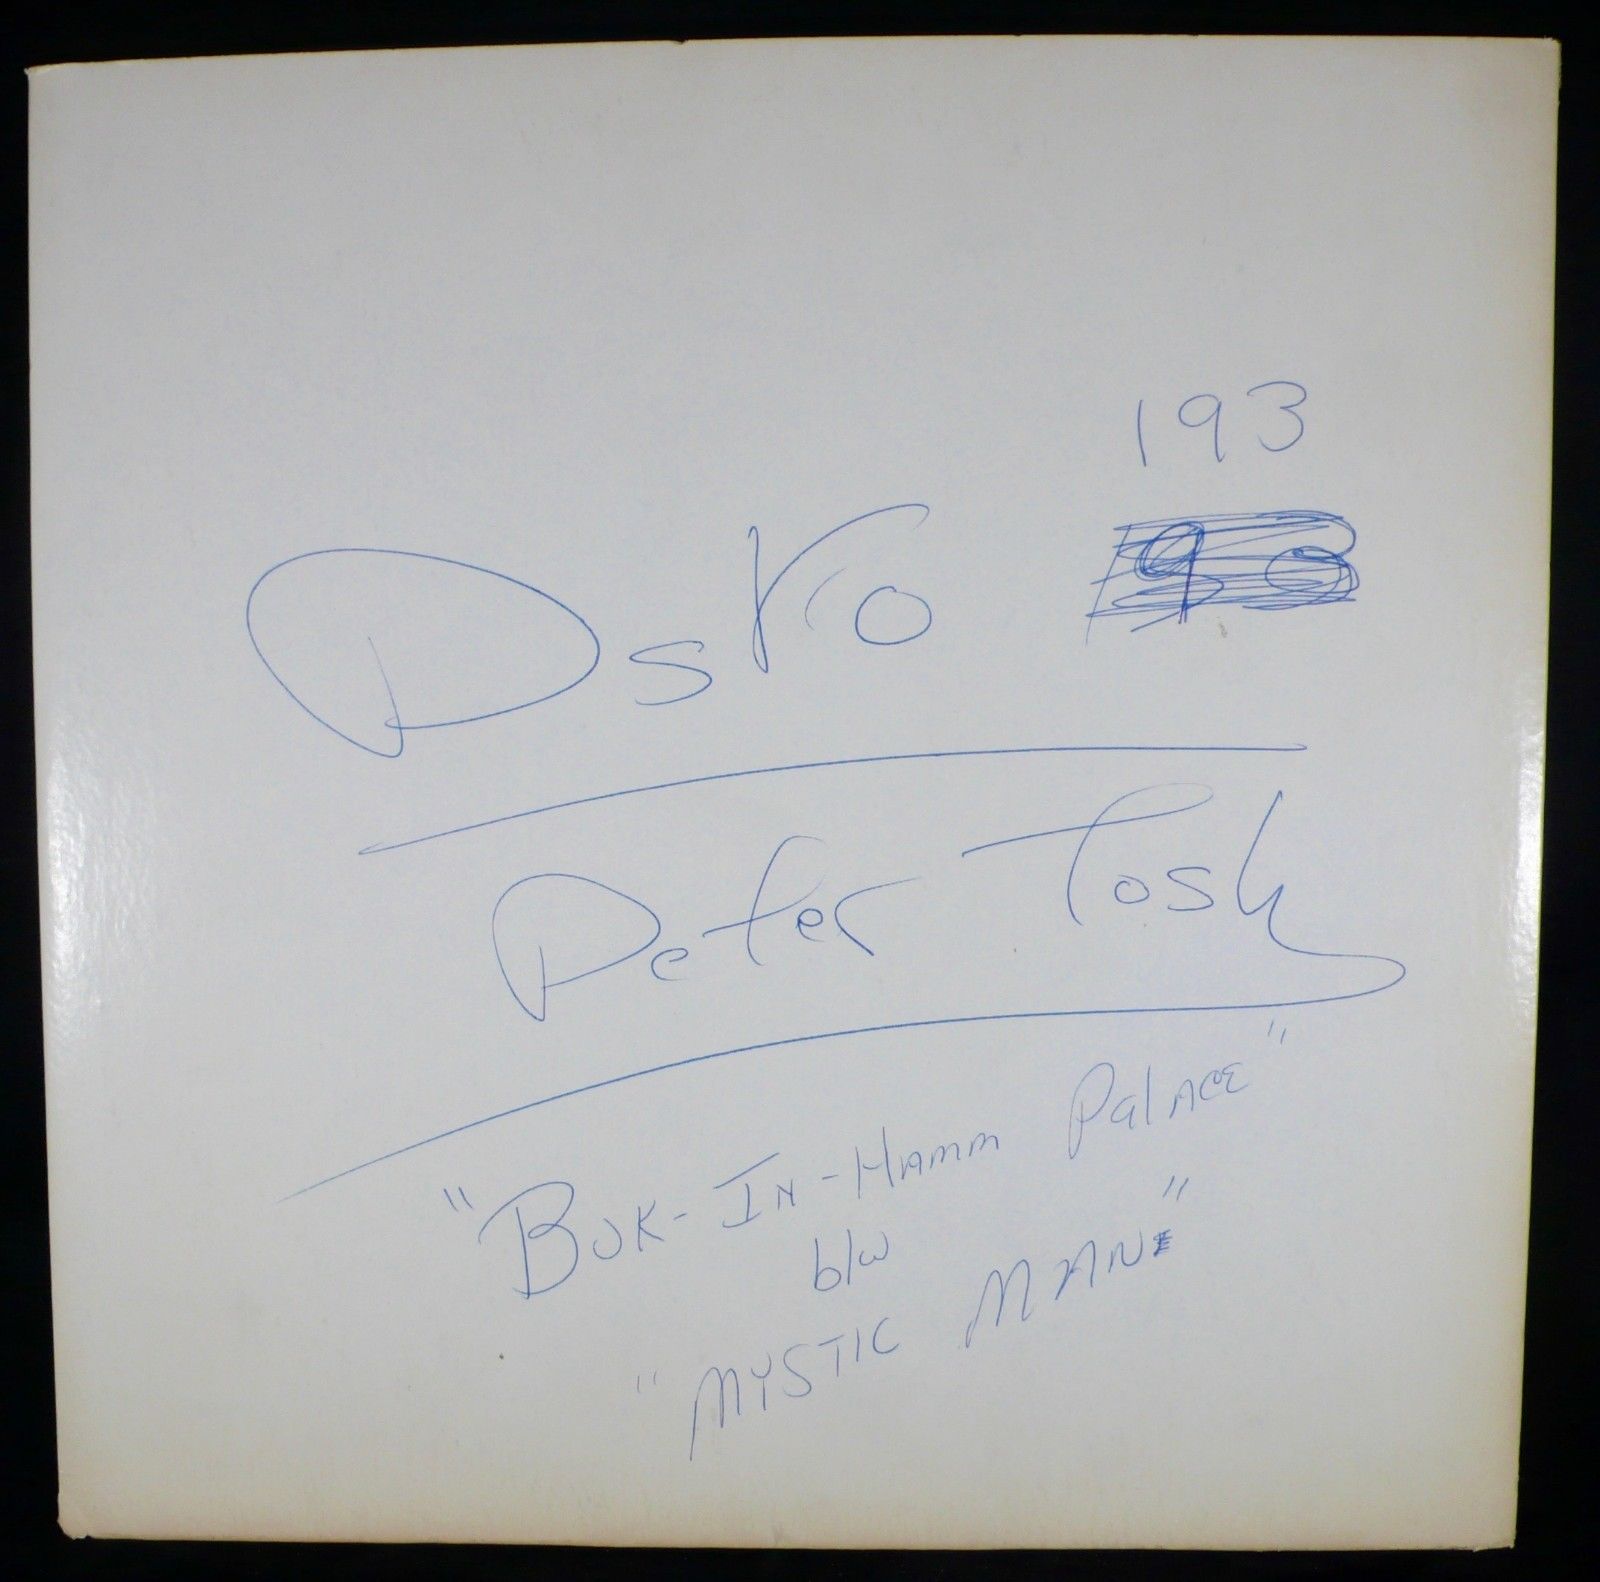 12" TEST-PRESSING Peter Tosh Buk-In-Hamm Palace/Mystic Man UNRELEASED